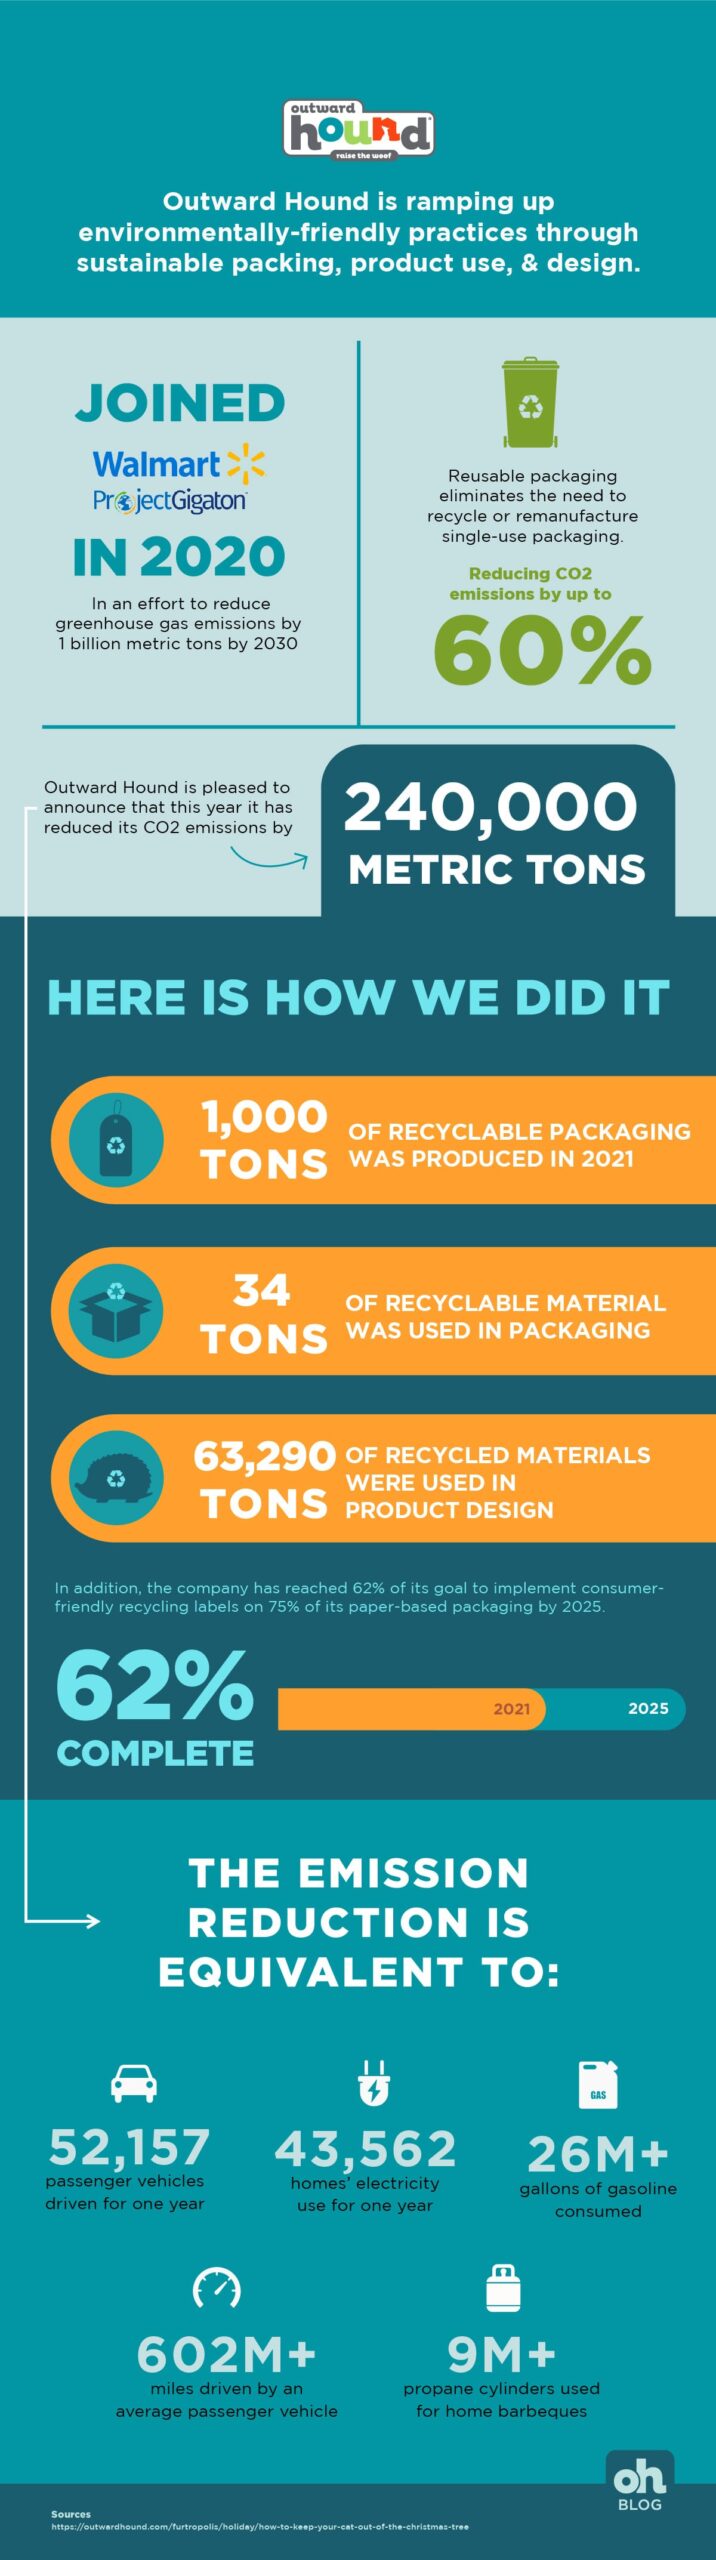 outward hound 2021 sustainability report infographic